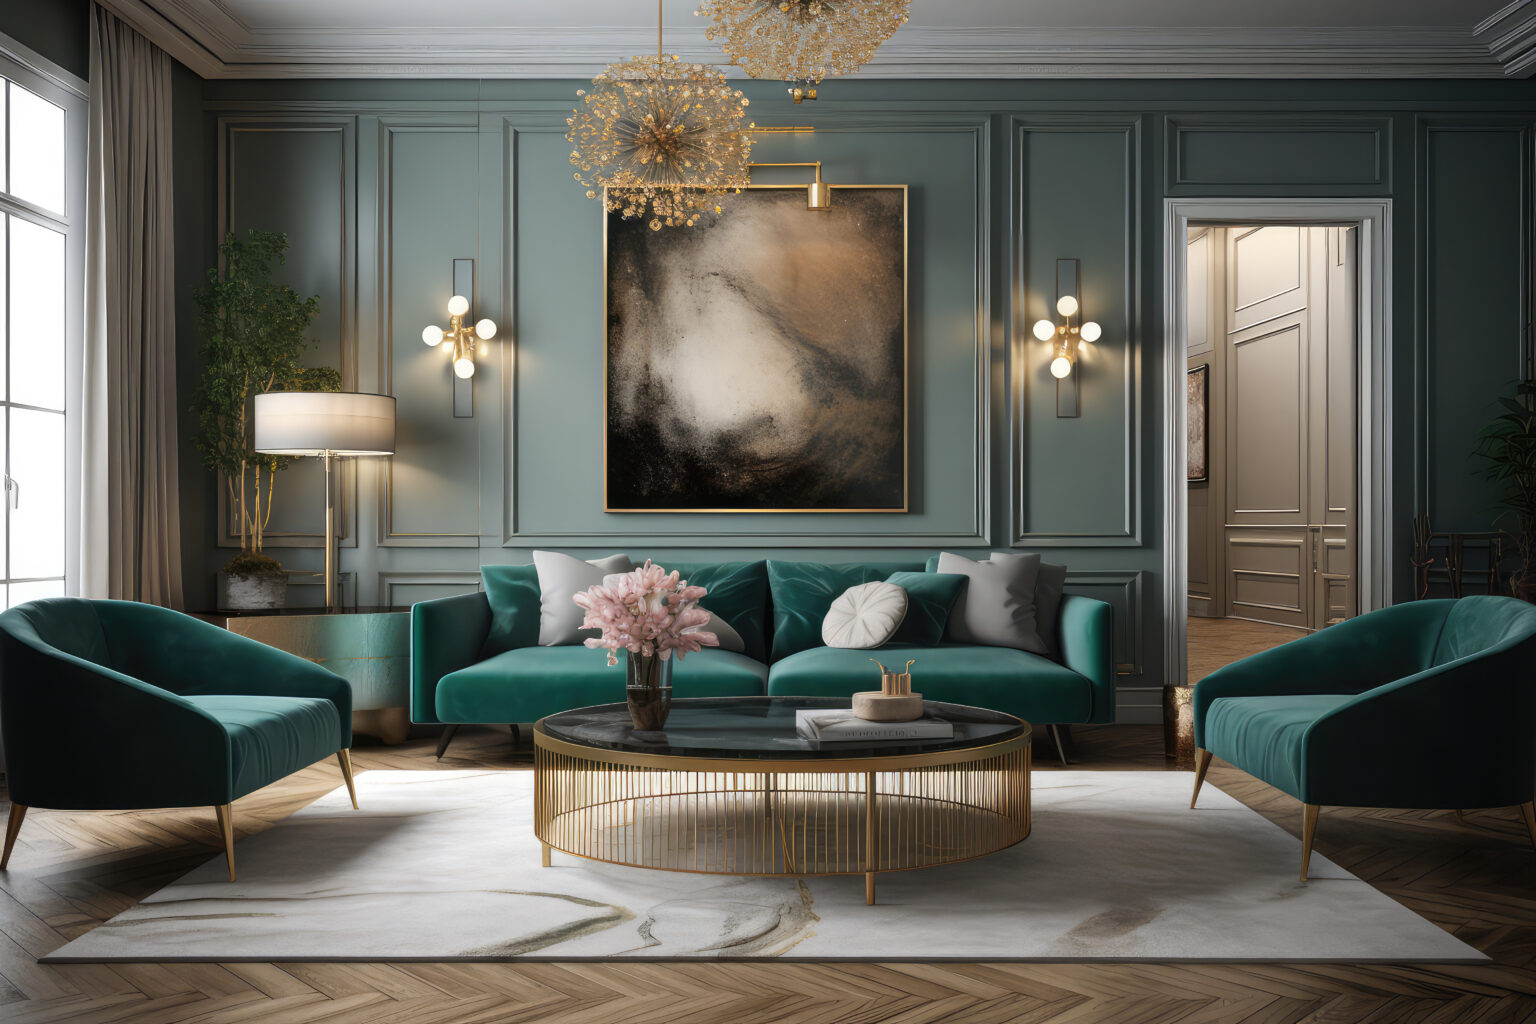 A Green Living Room With Blue And Gold Furniture Stock Photo 3d Model Design Art Deco Bedroom Stockpack Adobe Stock 1536x1024 